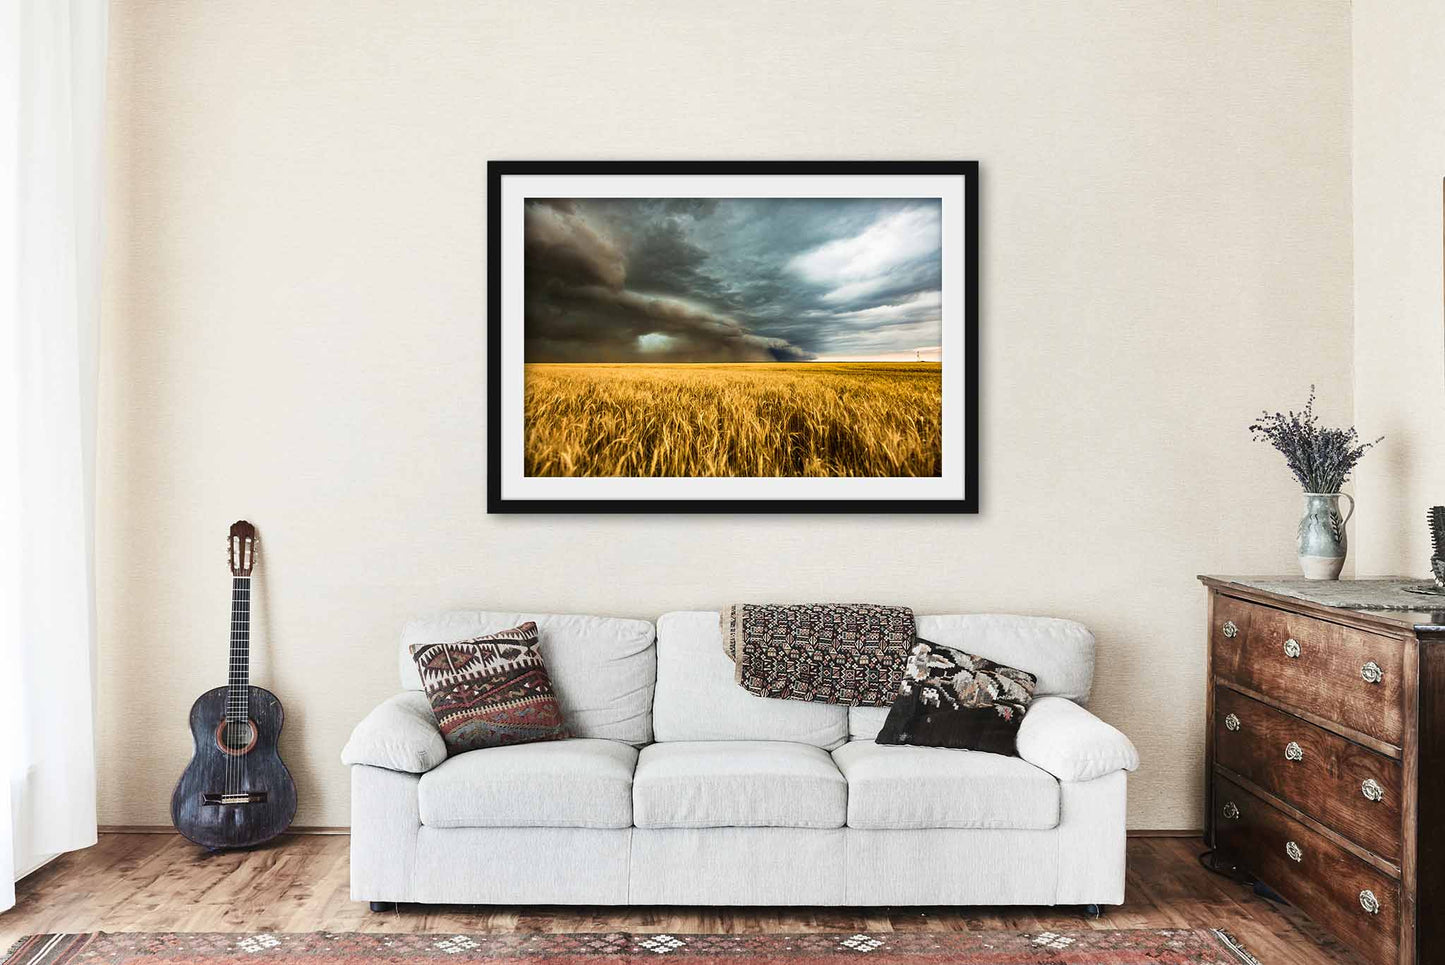 Framed Storm Print (Ready to Hang) Picture of Thunderstorm Over Golden Wheat Field in Colorado Weather Wall Art Western Decor